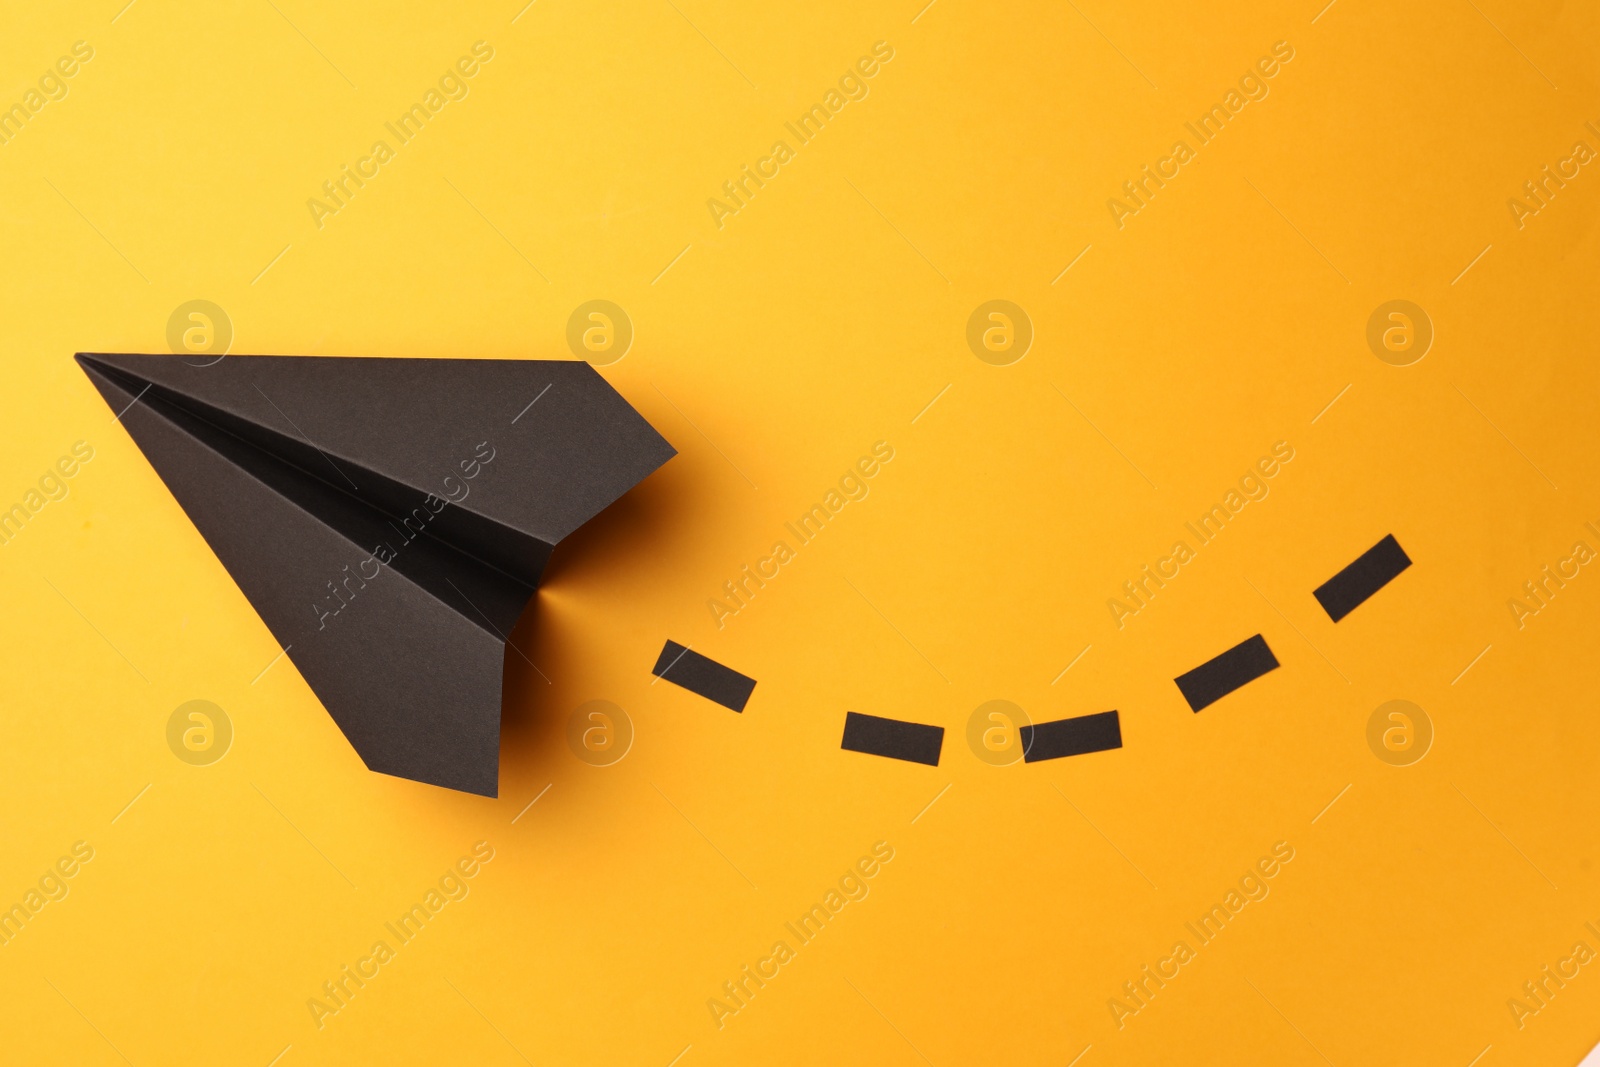 Photo of Handmade black paper plane with dotted lines on yellow background, top view